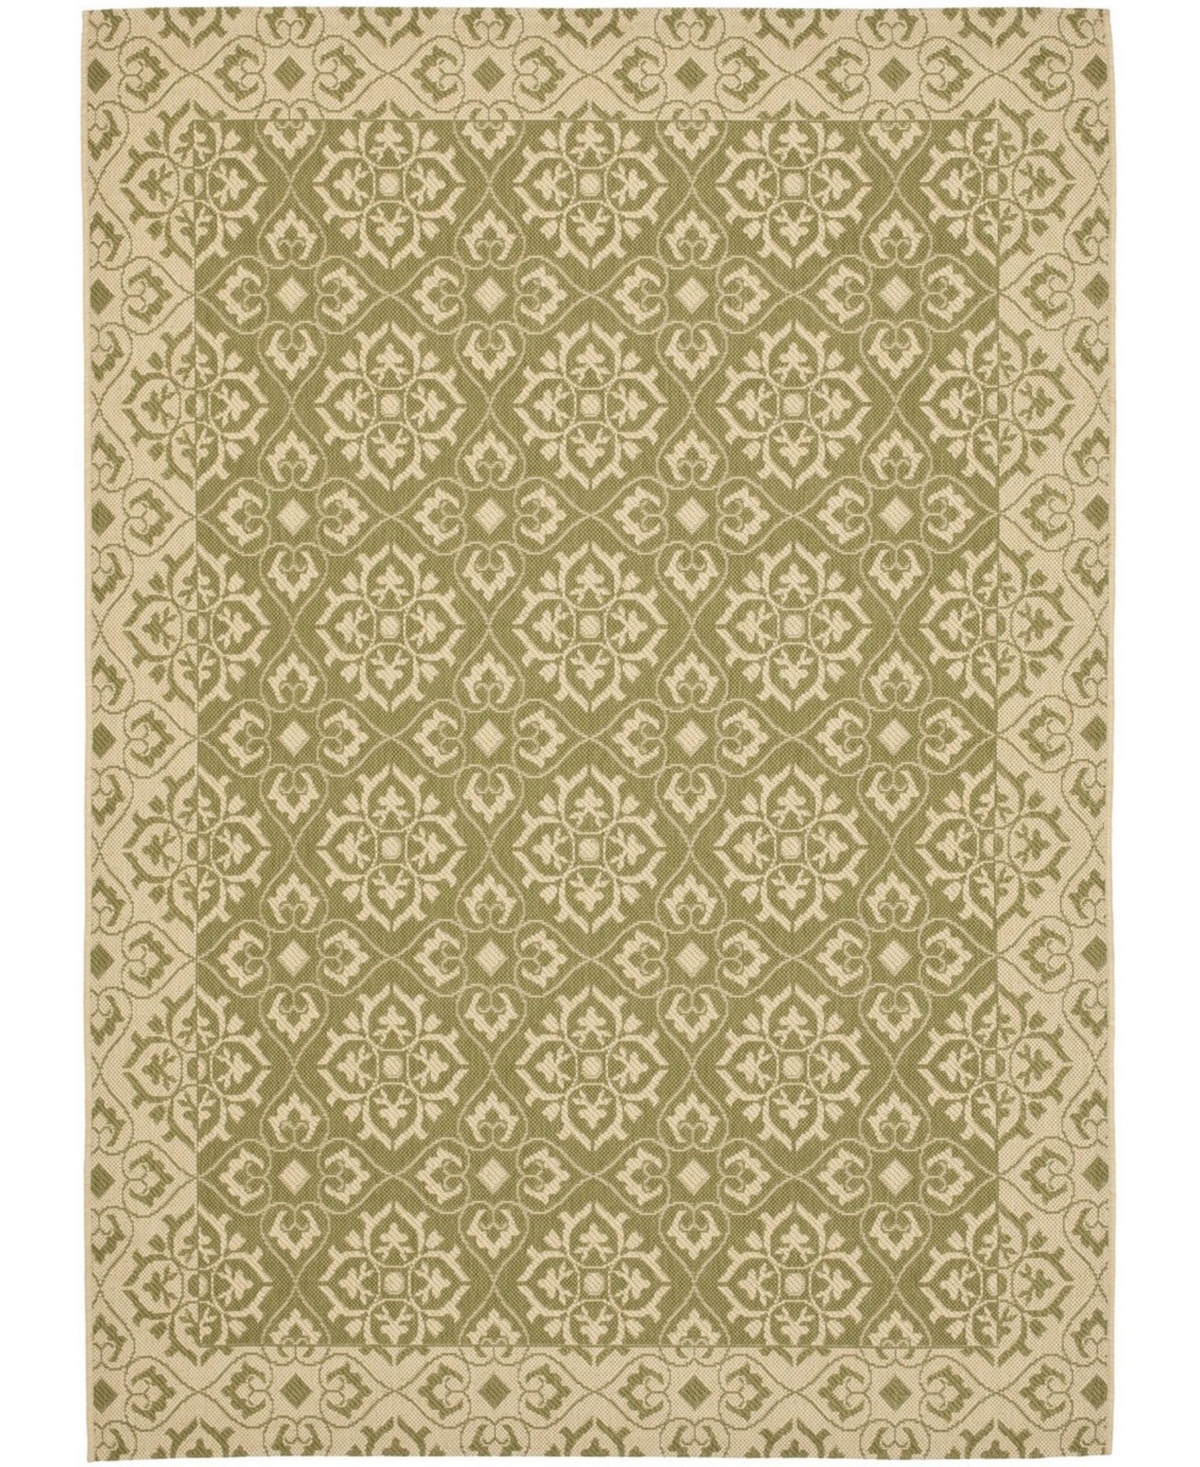 Safavieh Courtyard Cy6550 Green And Creme 5'3" X 7'7" Outdoor Area Rug